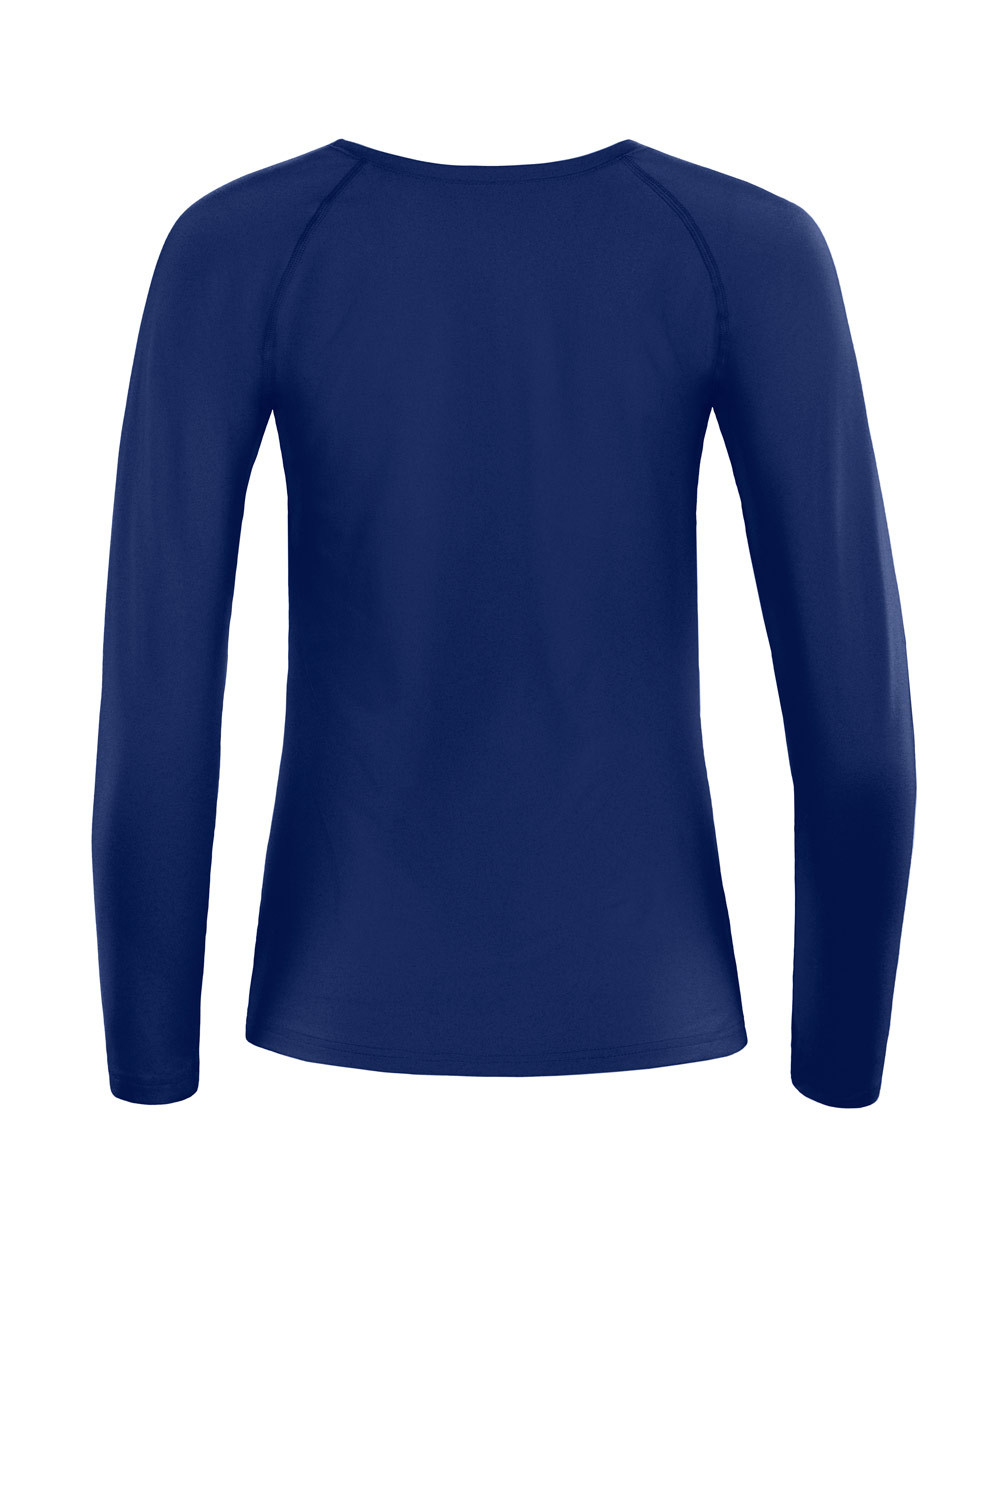 Functional Light and Soft Long Sleeve Top AET118LS, dark blue, Winshape  Ultra Soft Style